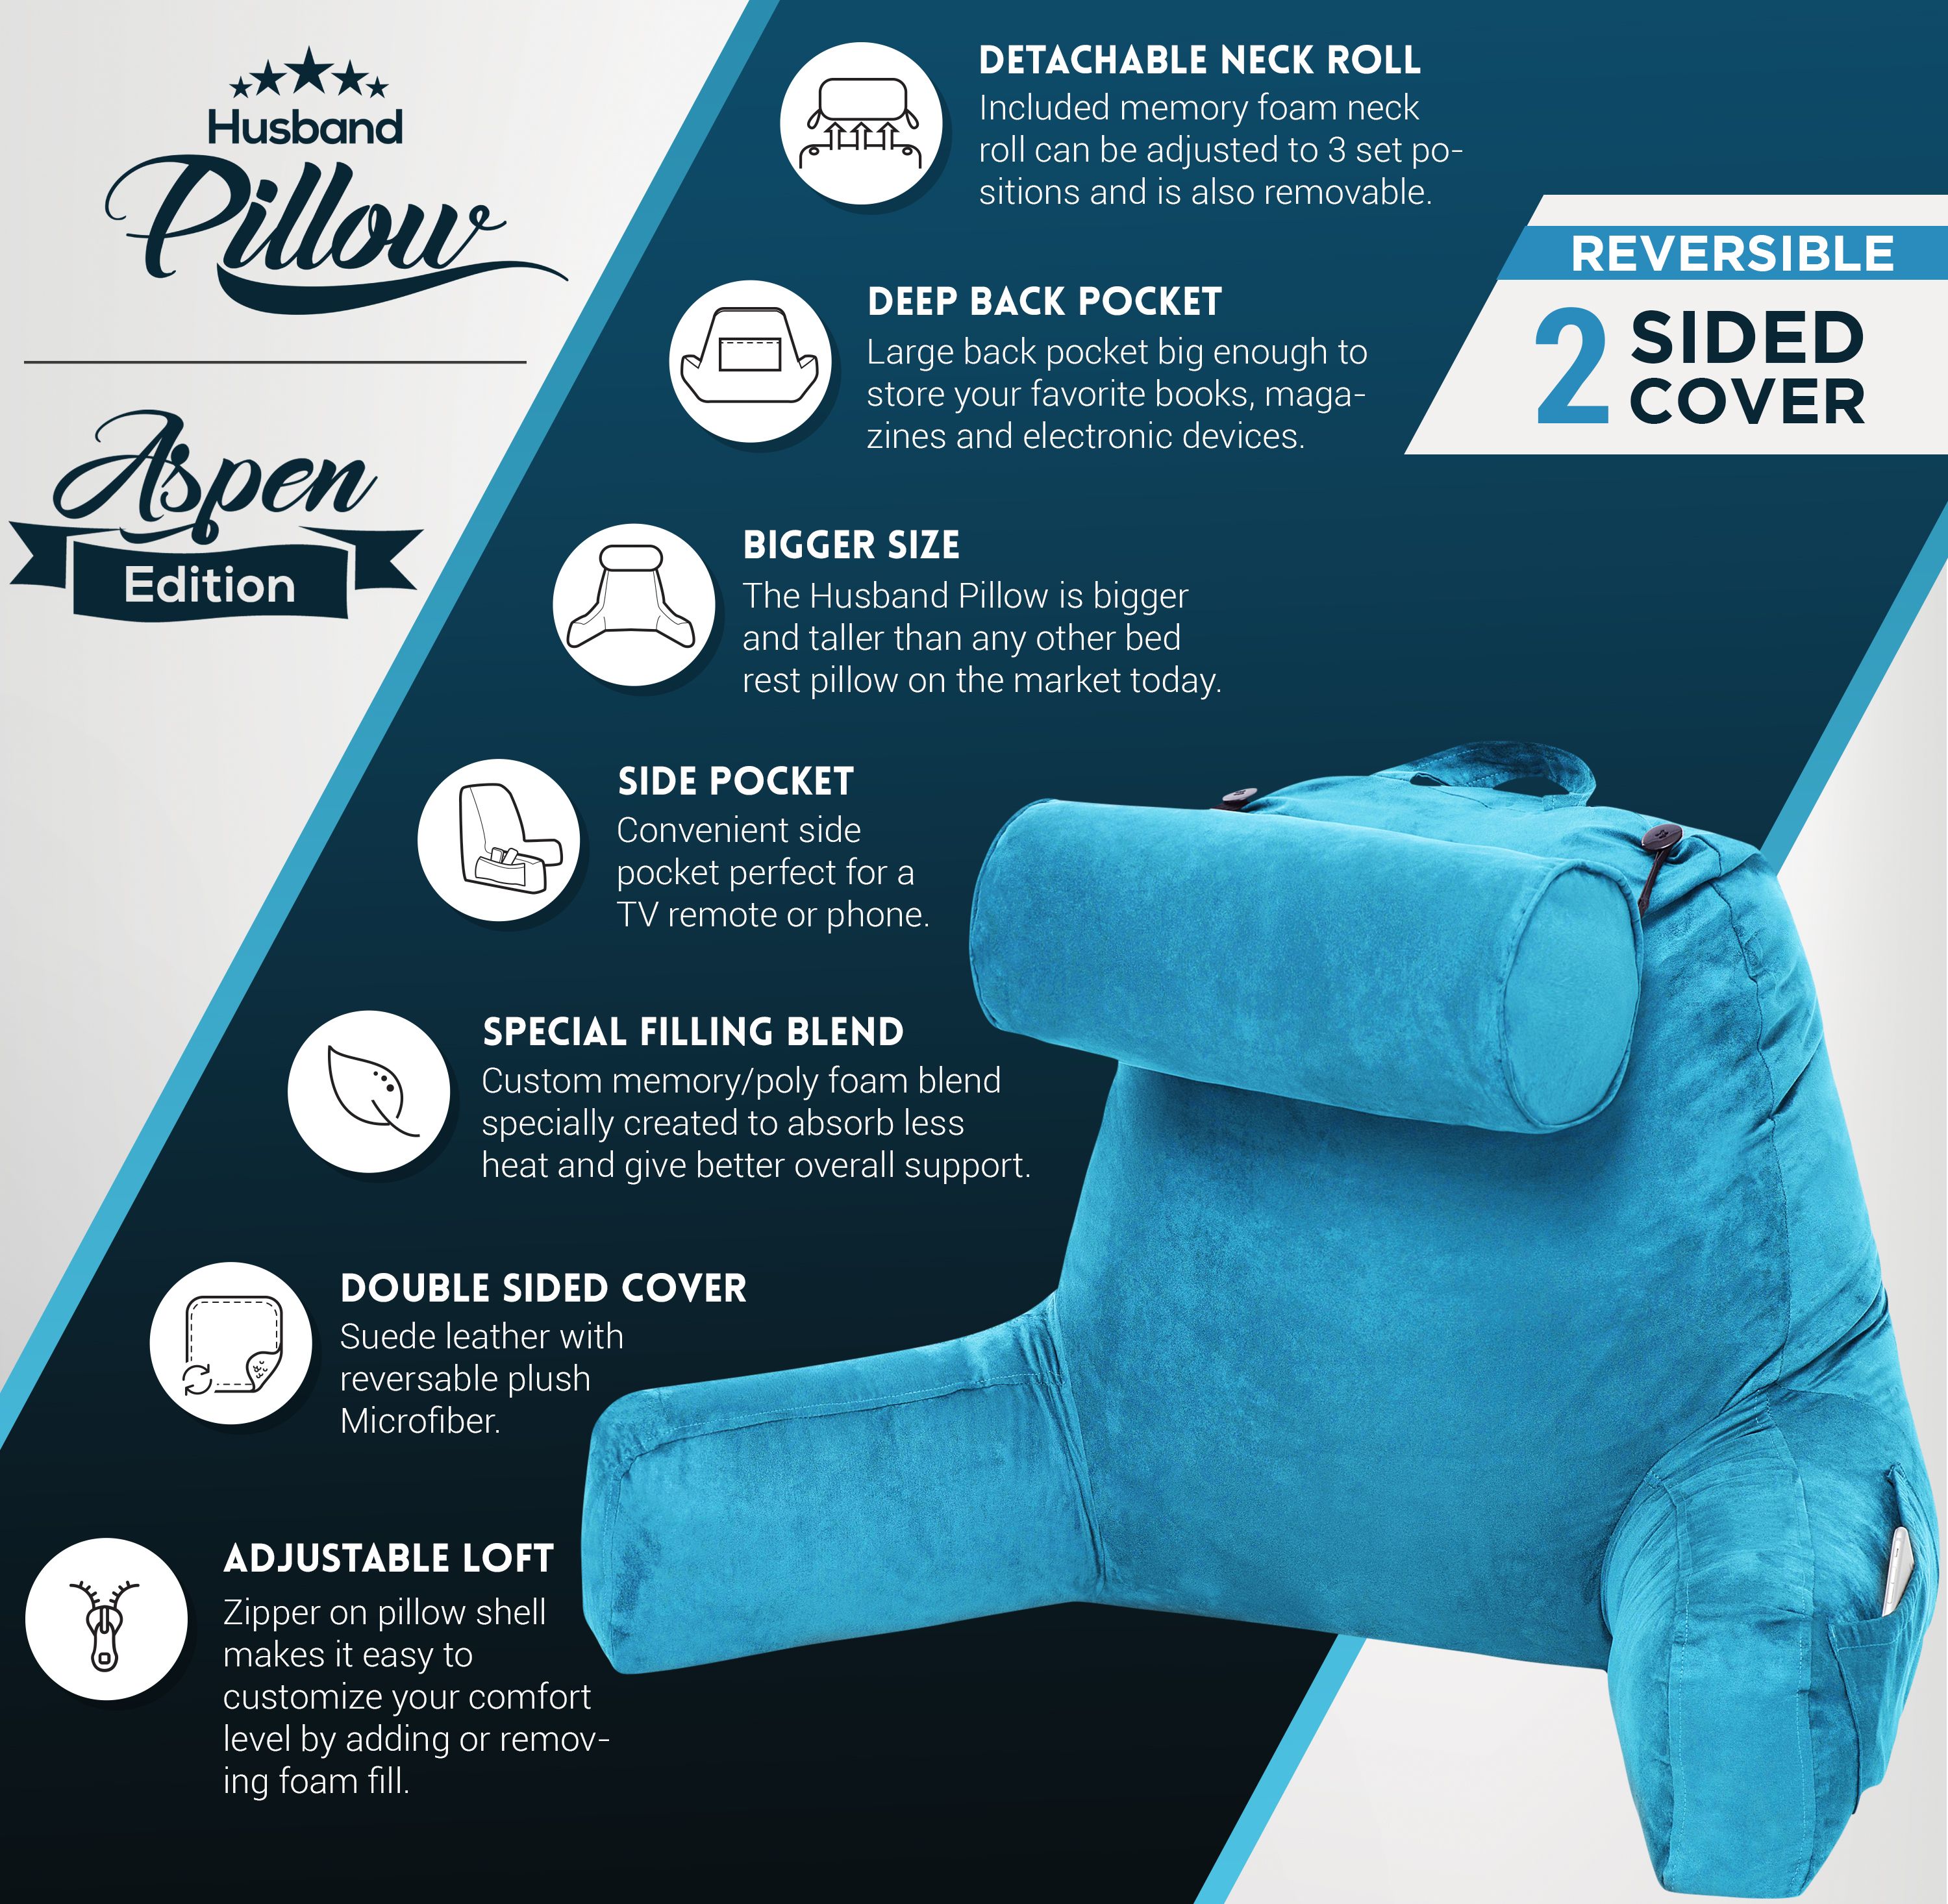 Husband Pillow, Aspen Edition - Reading and Bed Rest Pillow with Arms - Neck Roll on Bungee Cord or Removable - Premium Memory Foam - Reversible Two-Sided Cover Microsuede or Microfiber, Rodeo Blue - image 3 of 11